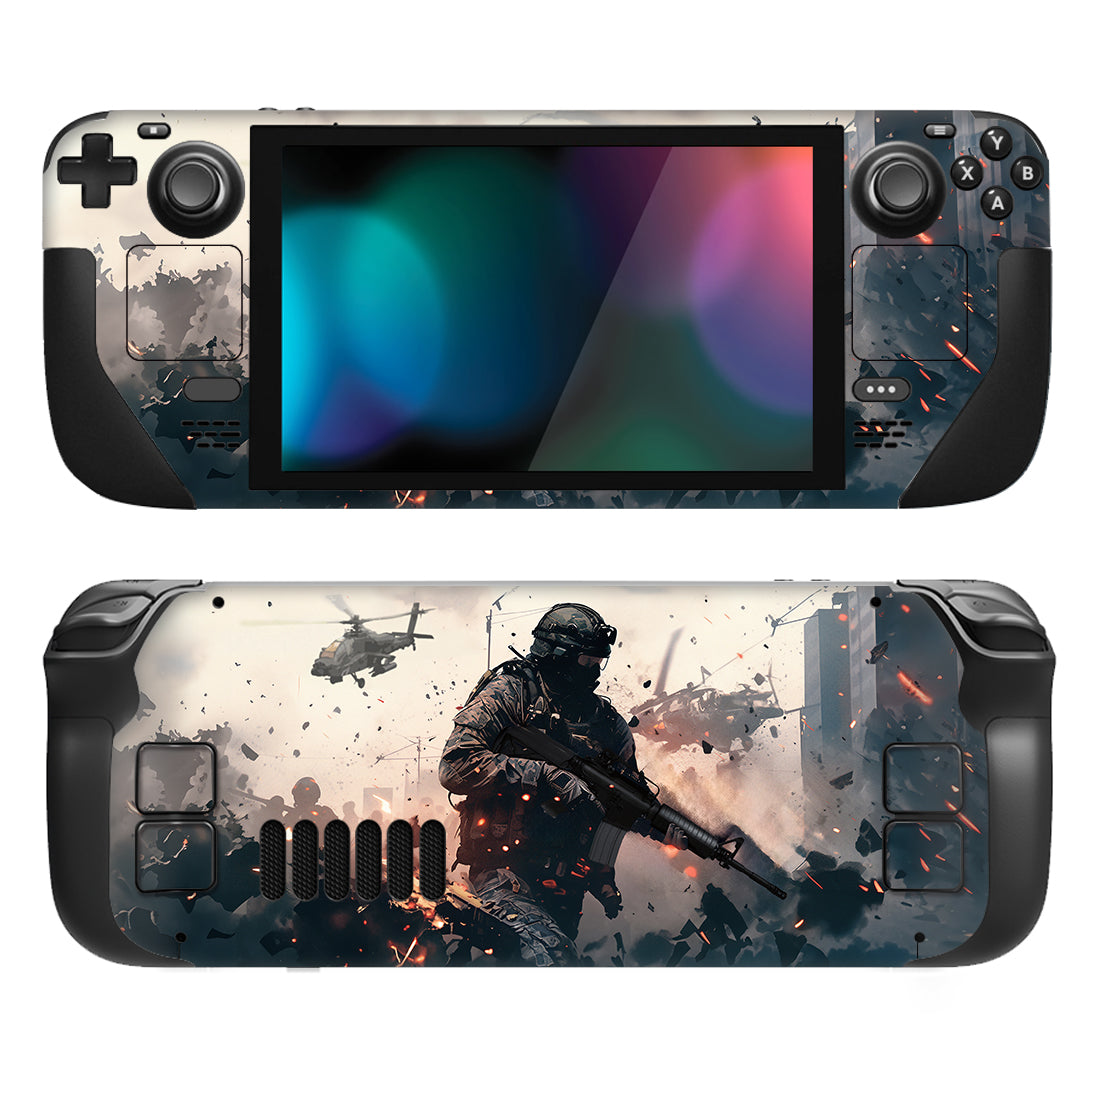 PlayVital Full Set Protective Skin Decal for Steam Deck, Custom Stickers Vinyl Cover for Steam Deck Handheld Gaming PC - Solitary Vanguard - SDTM084 PlayVital